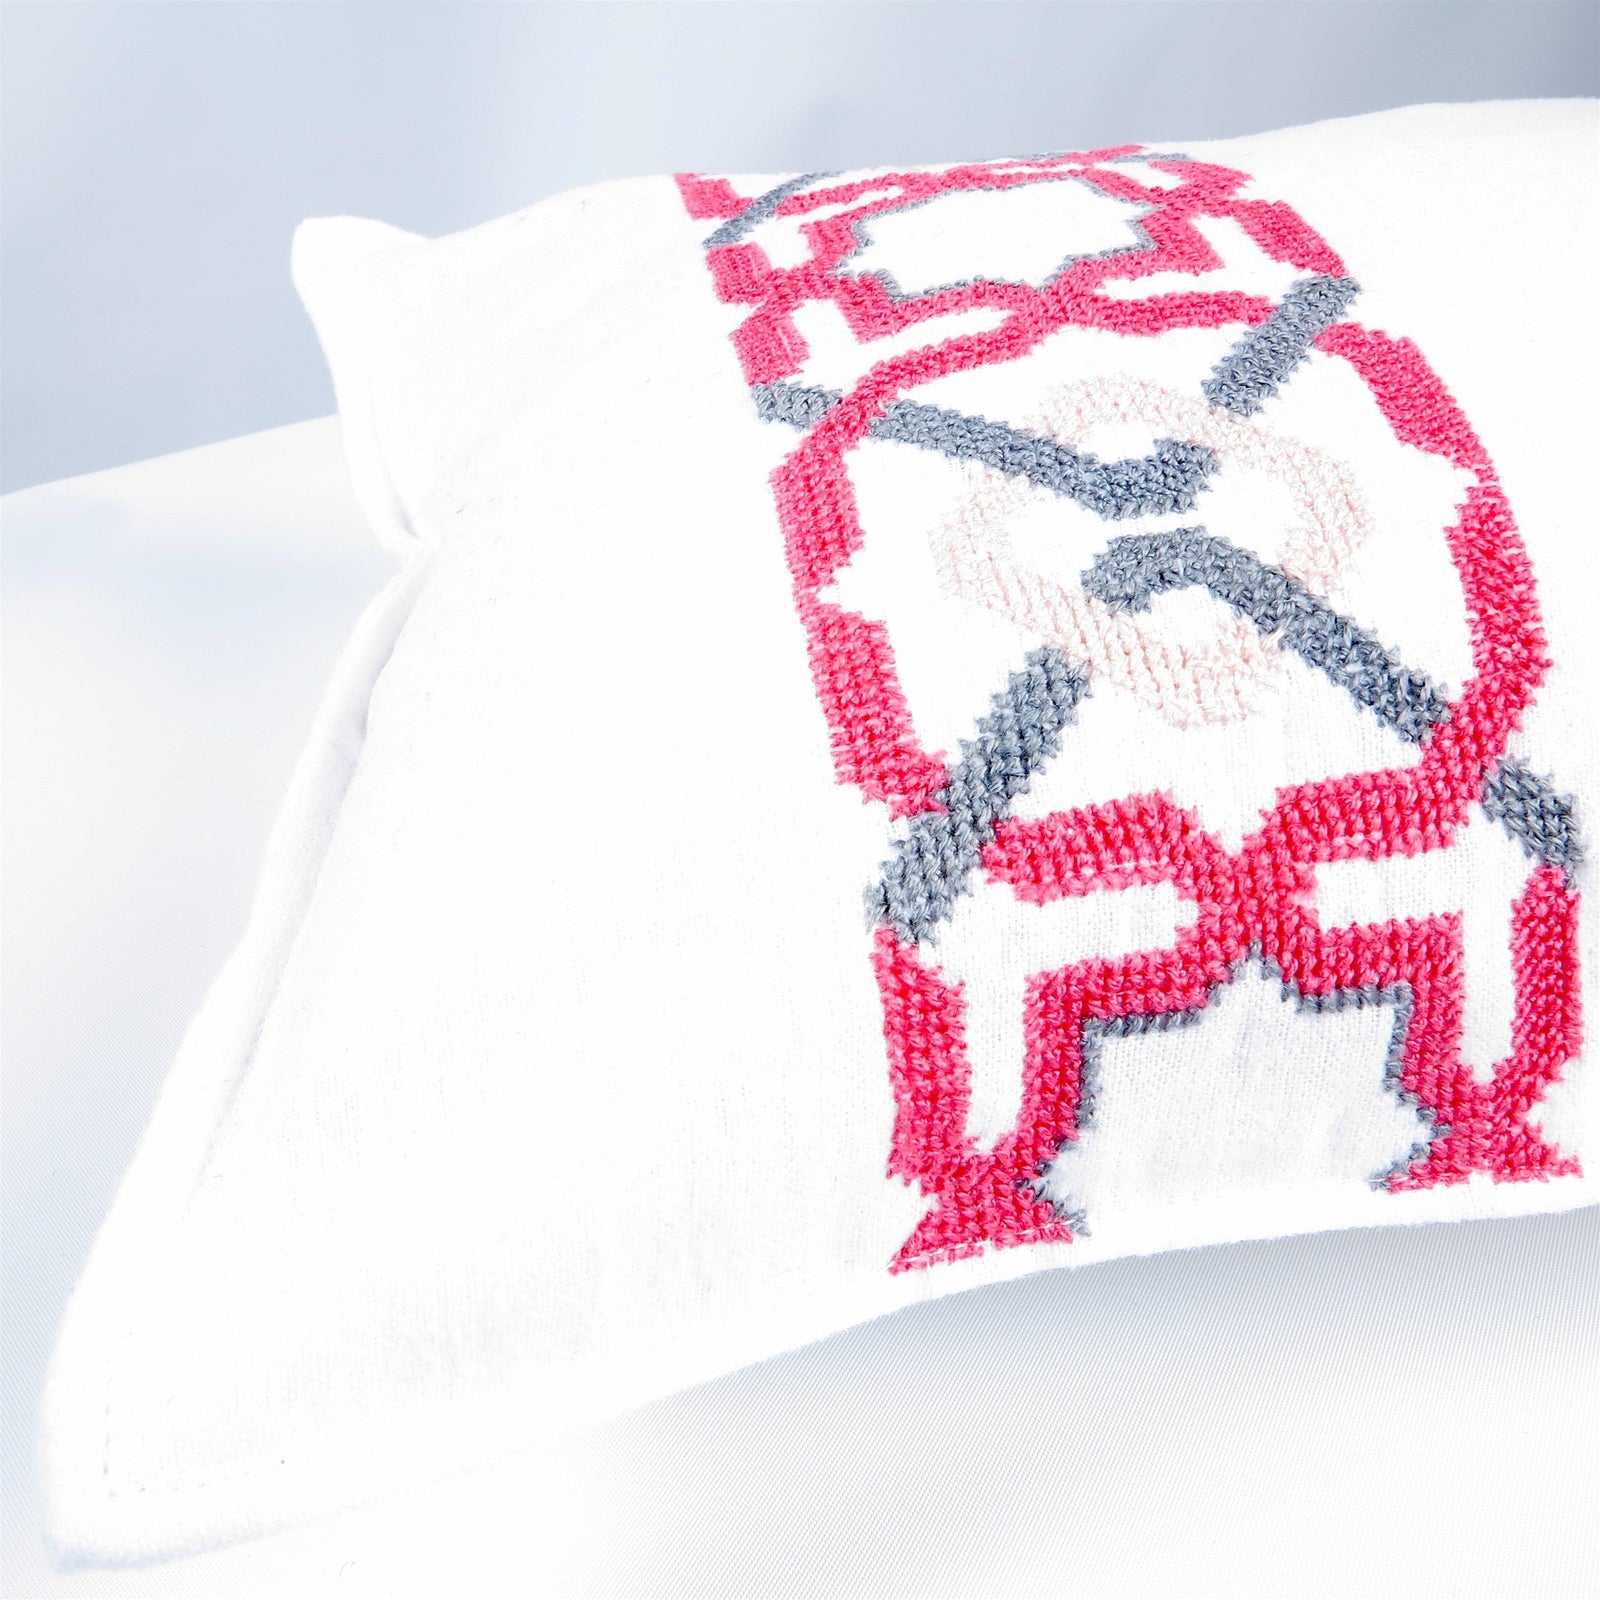 WHITE COTTON BABY CUSHION COVER ALHAMBRA®